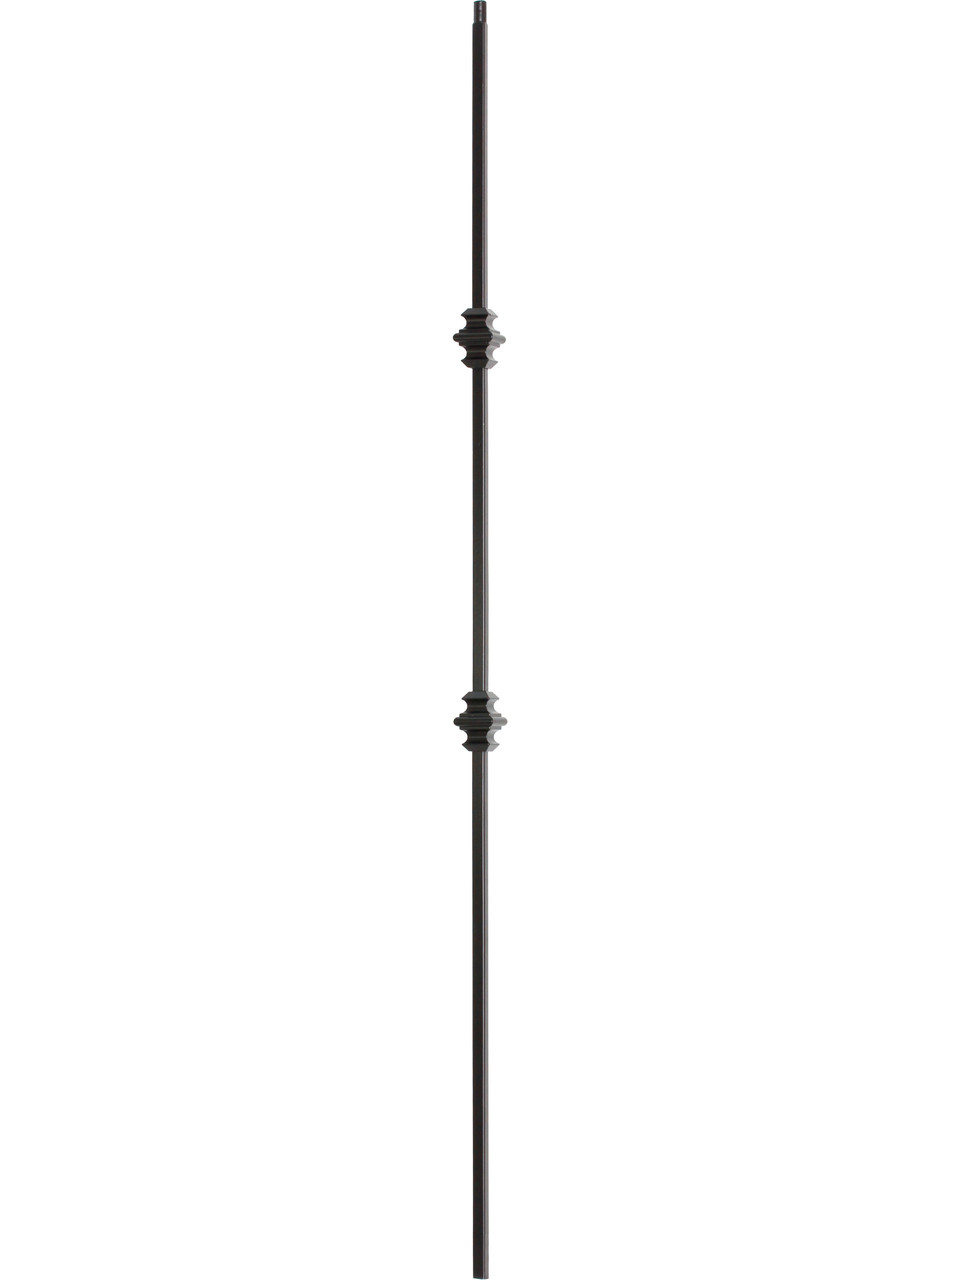 FIH5562-44 Hollow Double Knuckle Baluster